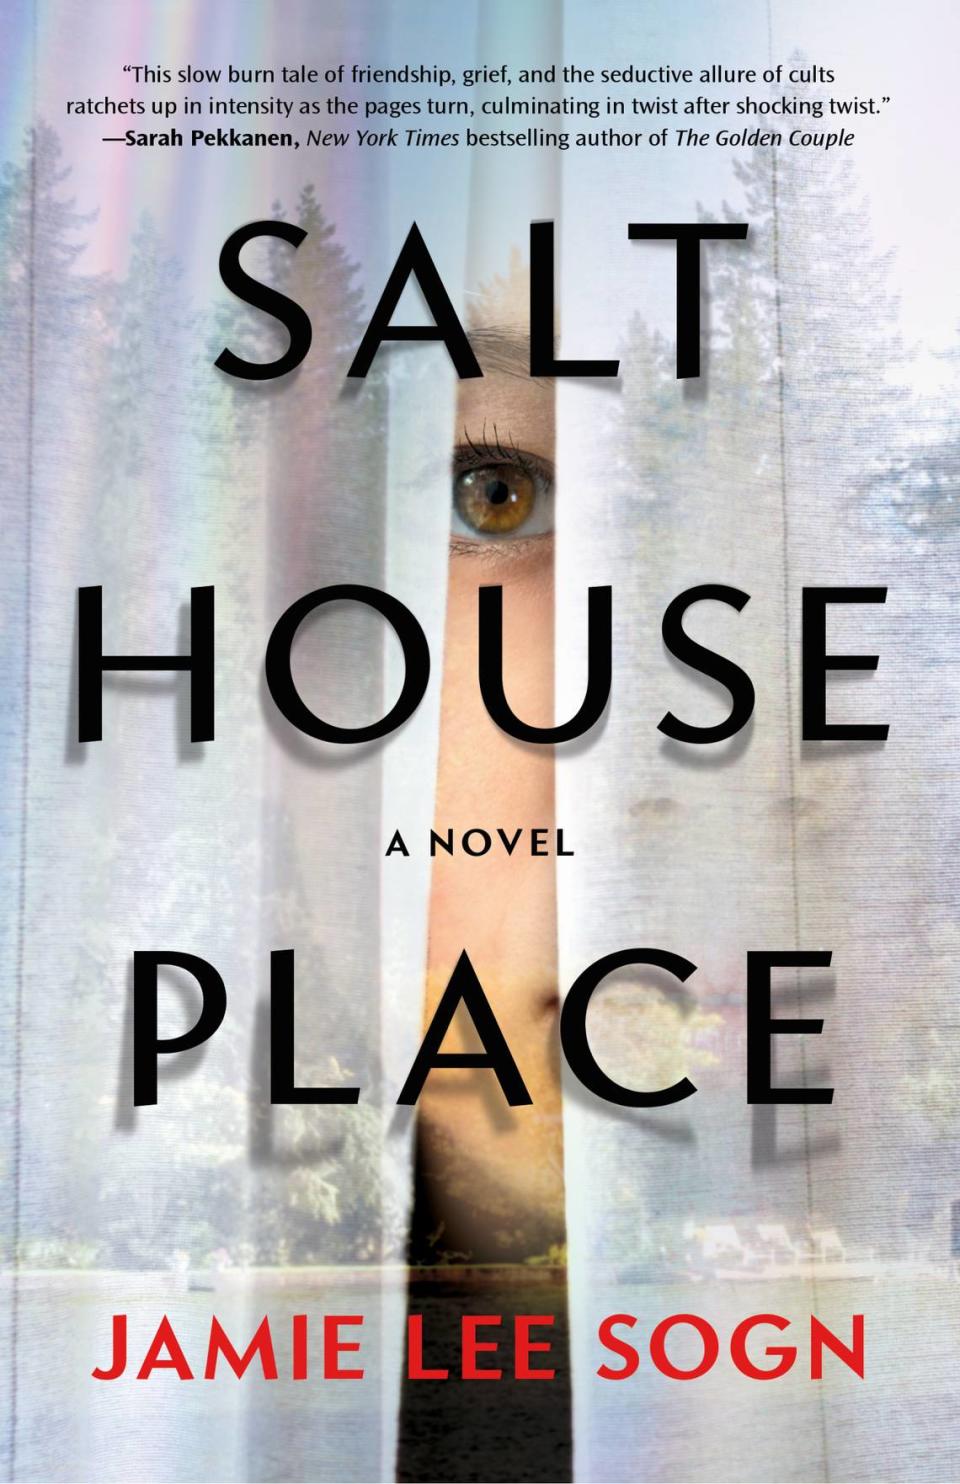 Jamie Sogn’s debut novel, “Salthouse Place,” comes out Sept. 1.